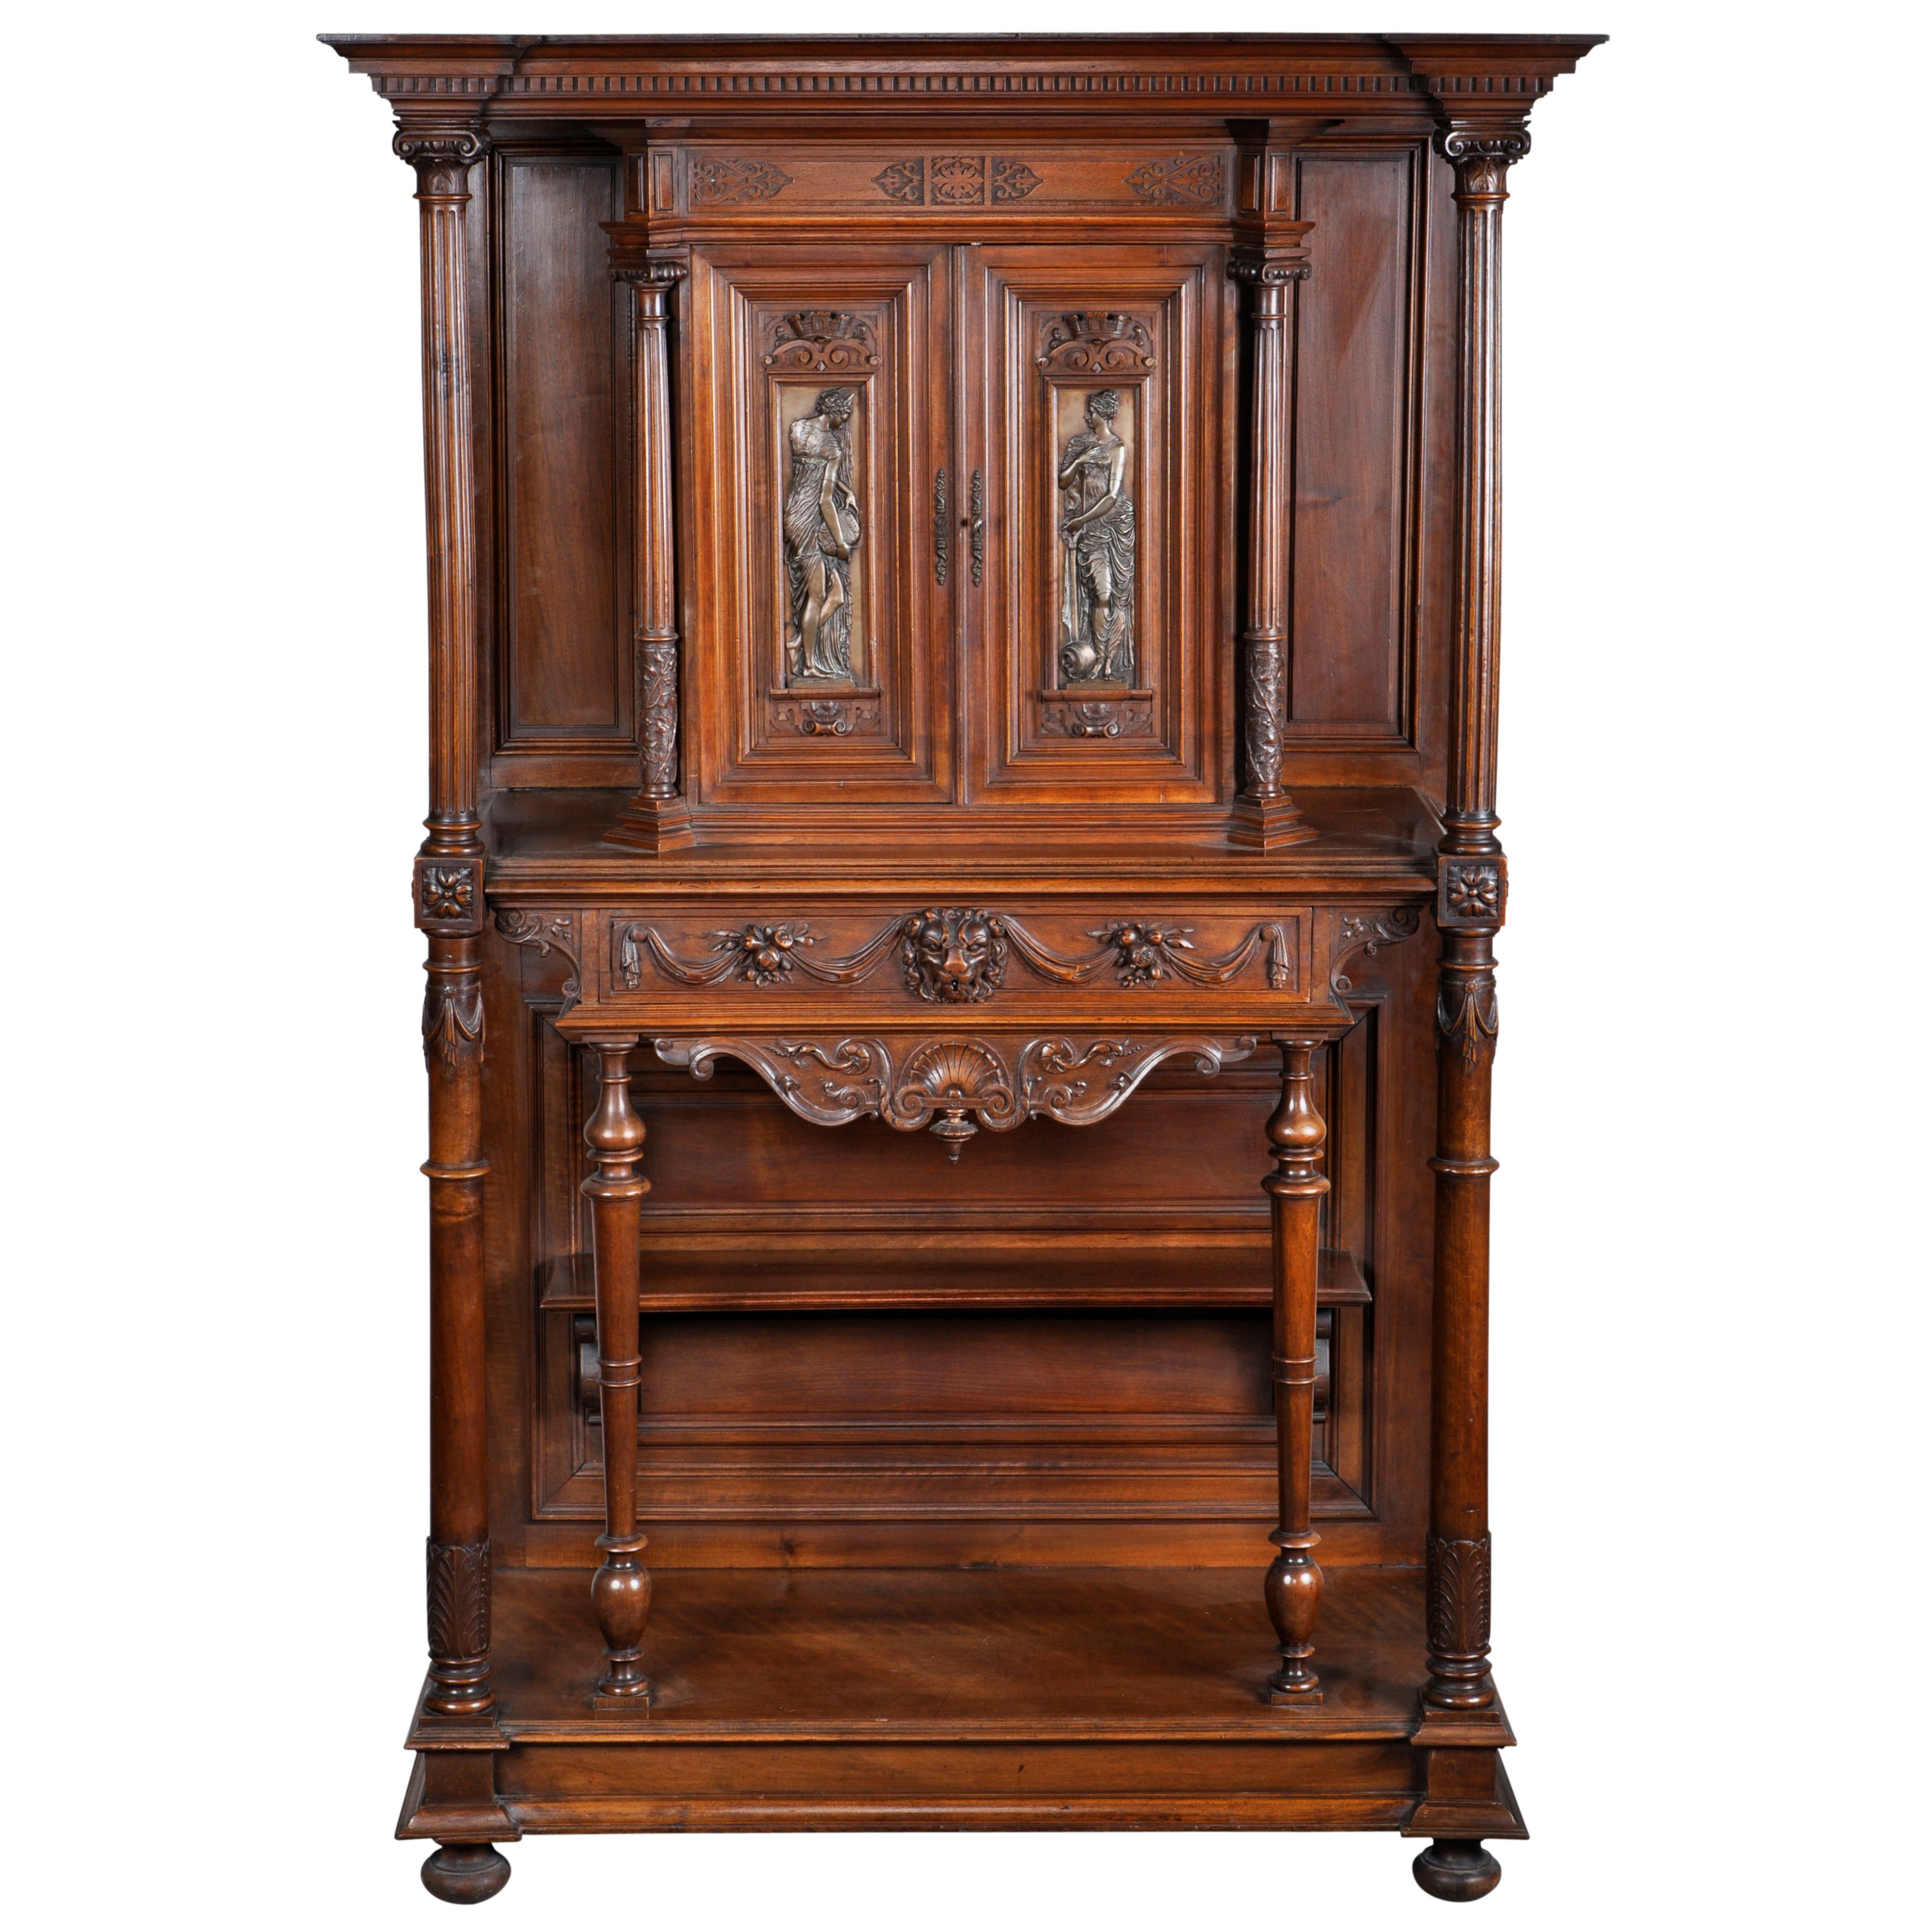 Paul Mazaroz, Neo-Renaissance Style Credenza in Carved Walnut For Sale